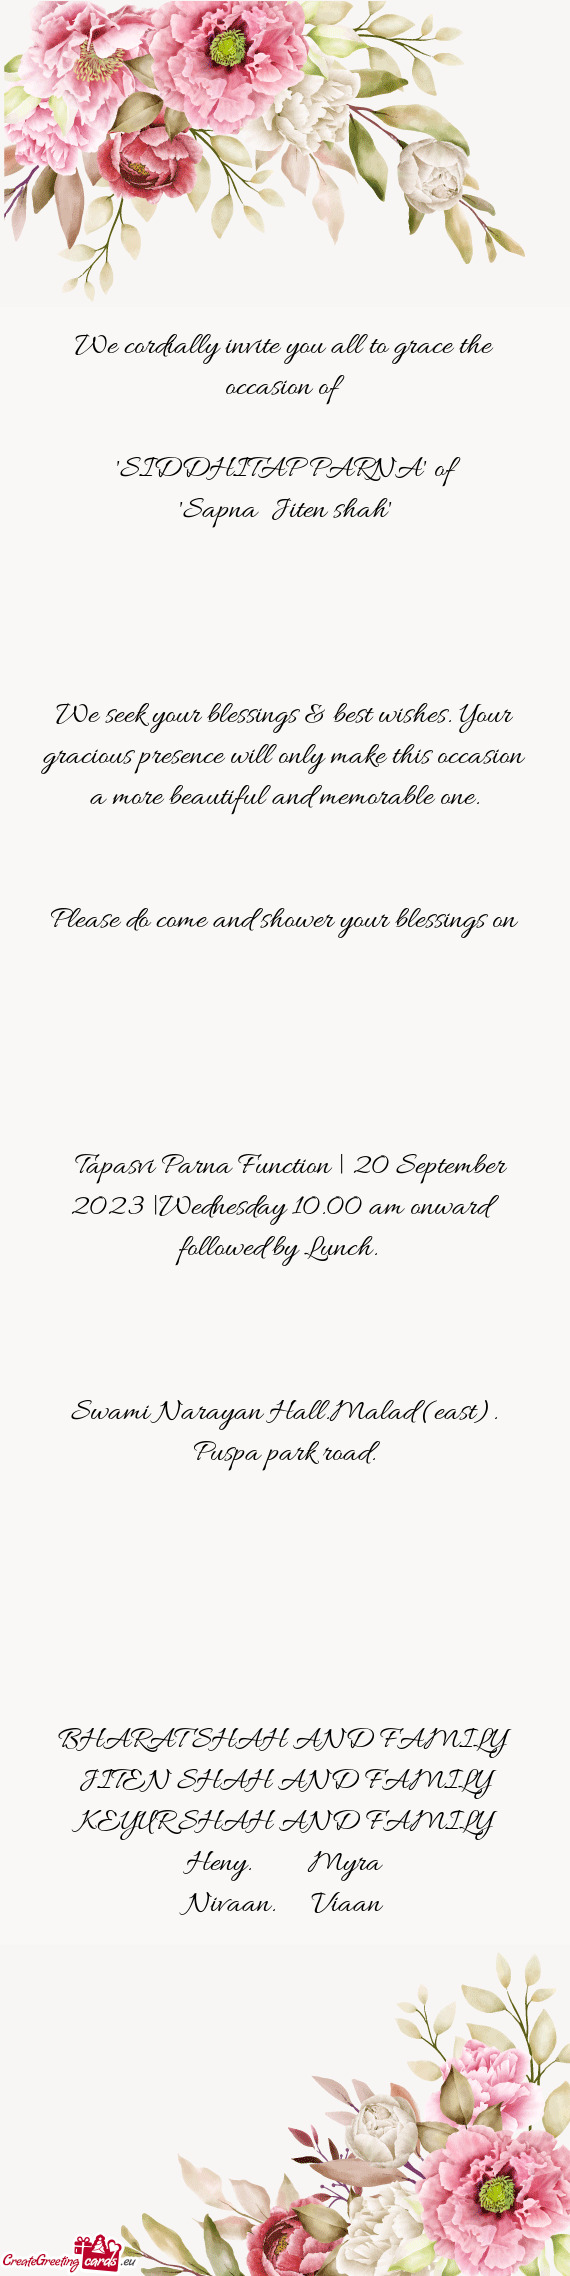 Tapasvi Parna Function | 20 September 2023 |Wednesday 10.00 am onward followed by Lunch